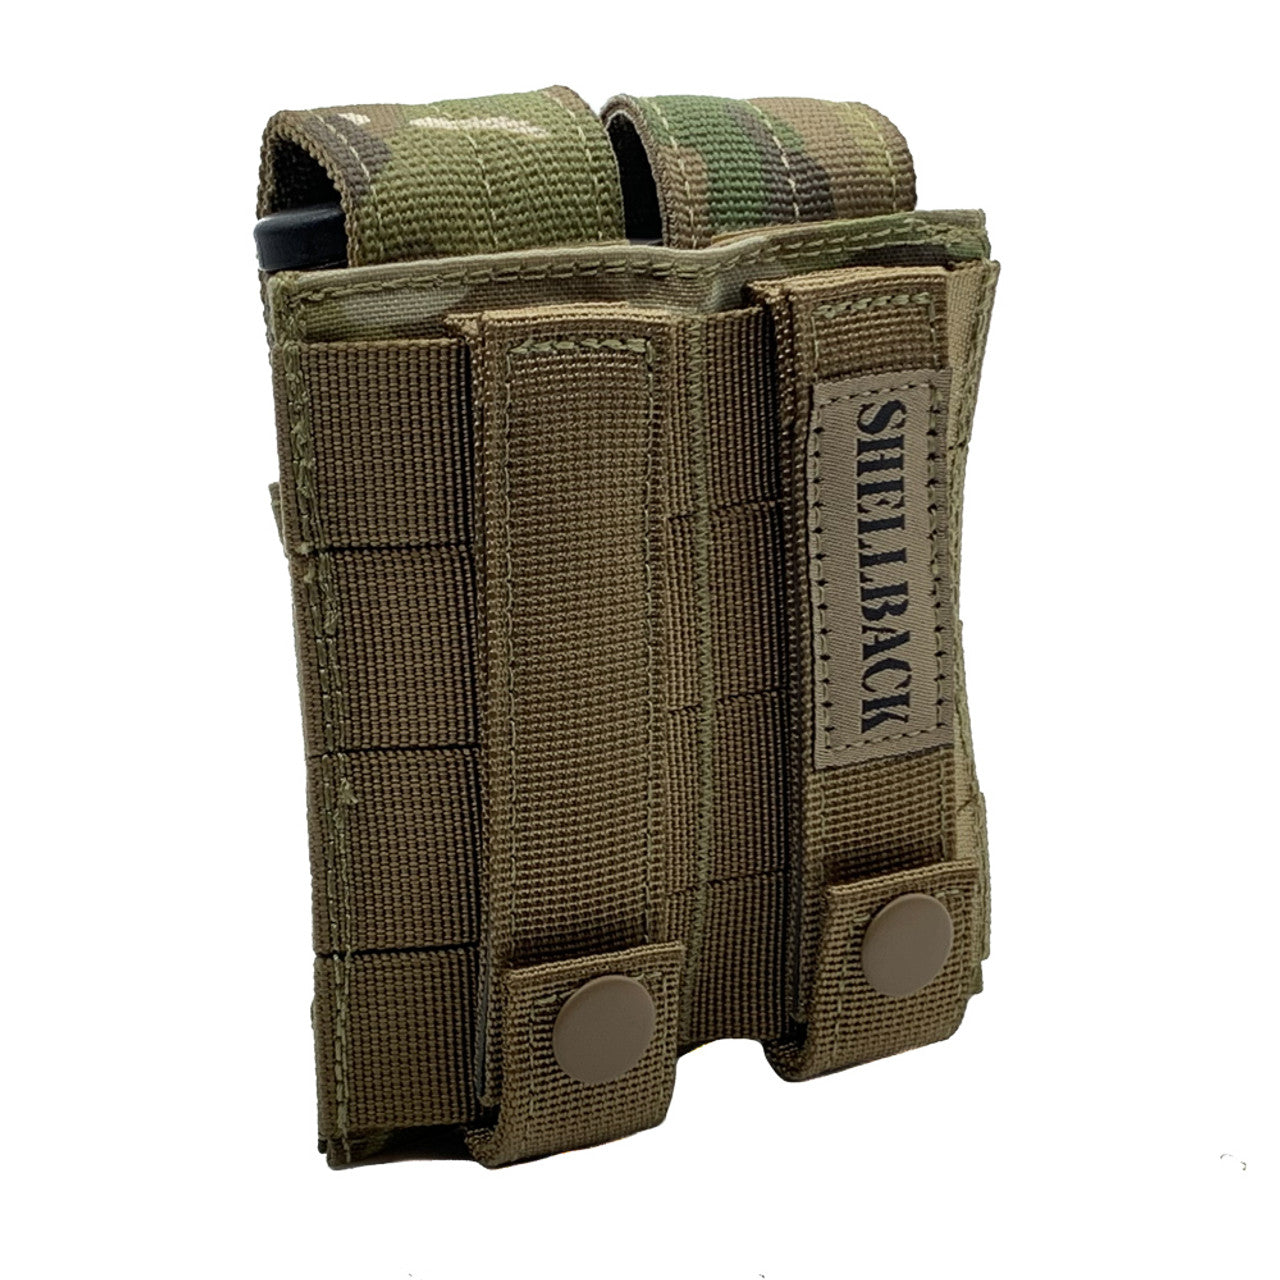 A small Shellback Tactical Double Pistol Mag Pouch with two holsters on it.